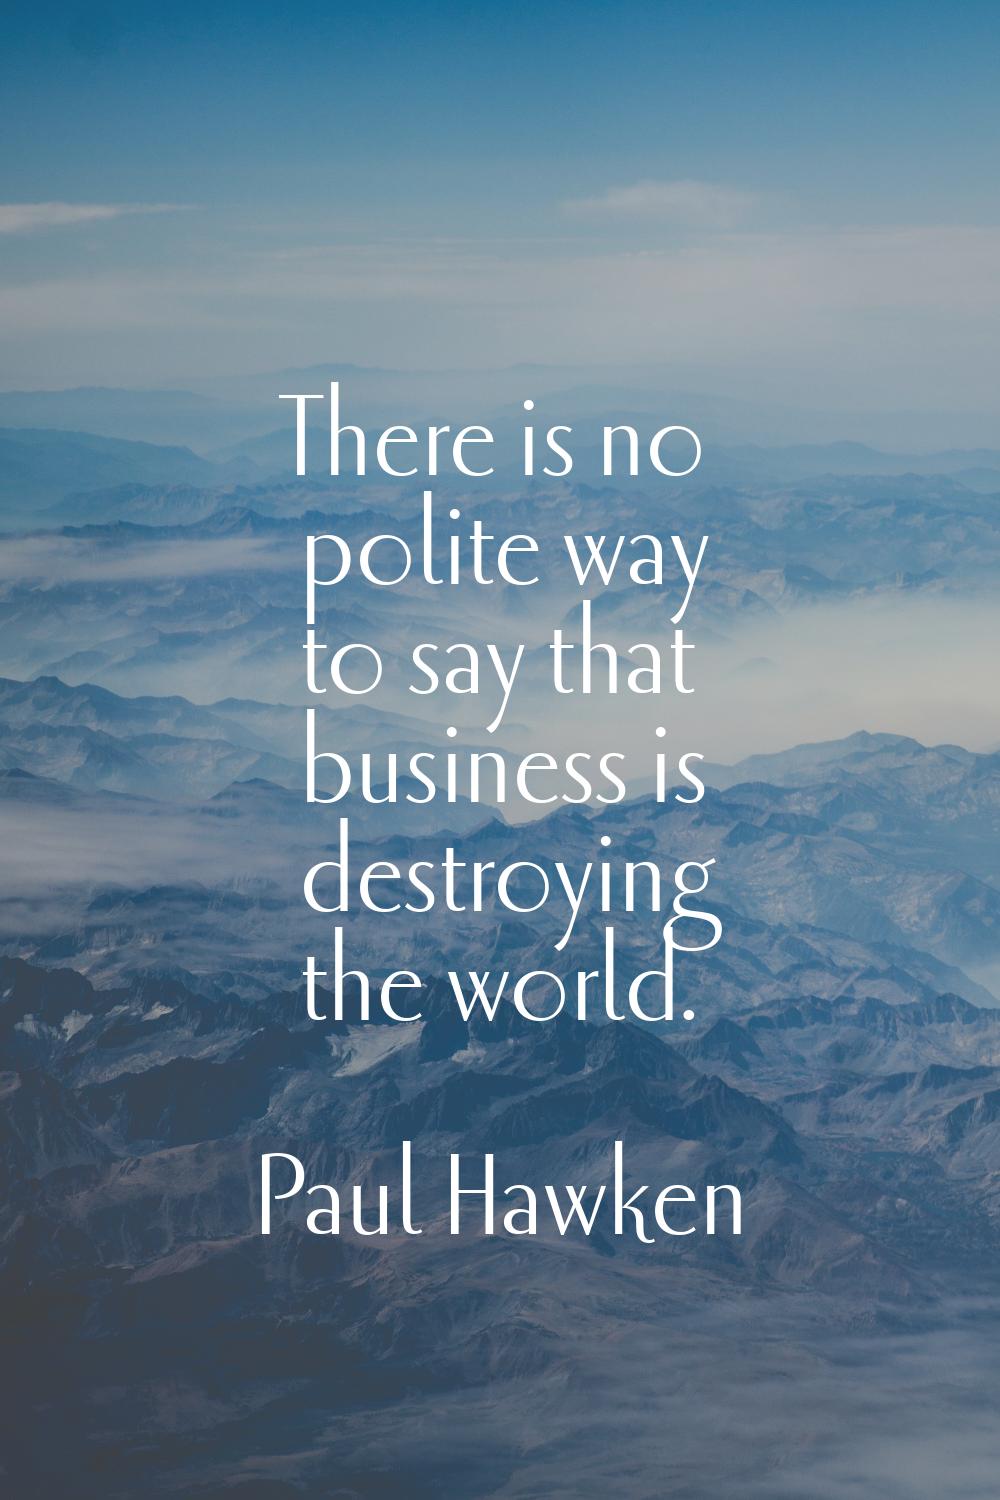 There is no polite way to say that business is destroying the world.